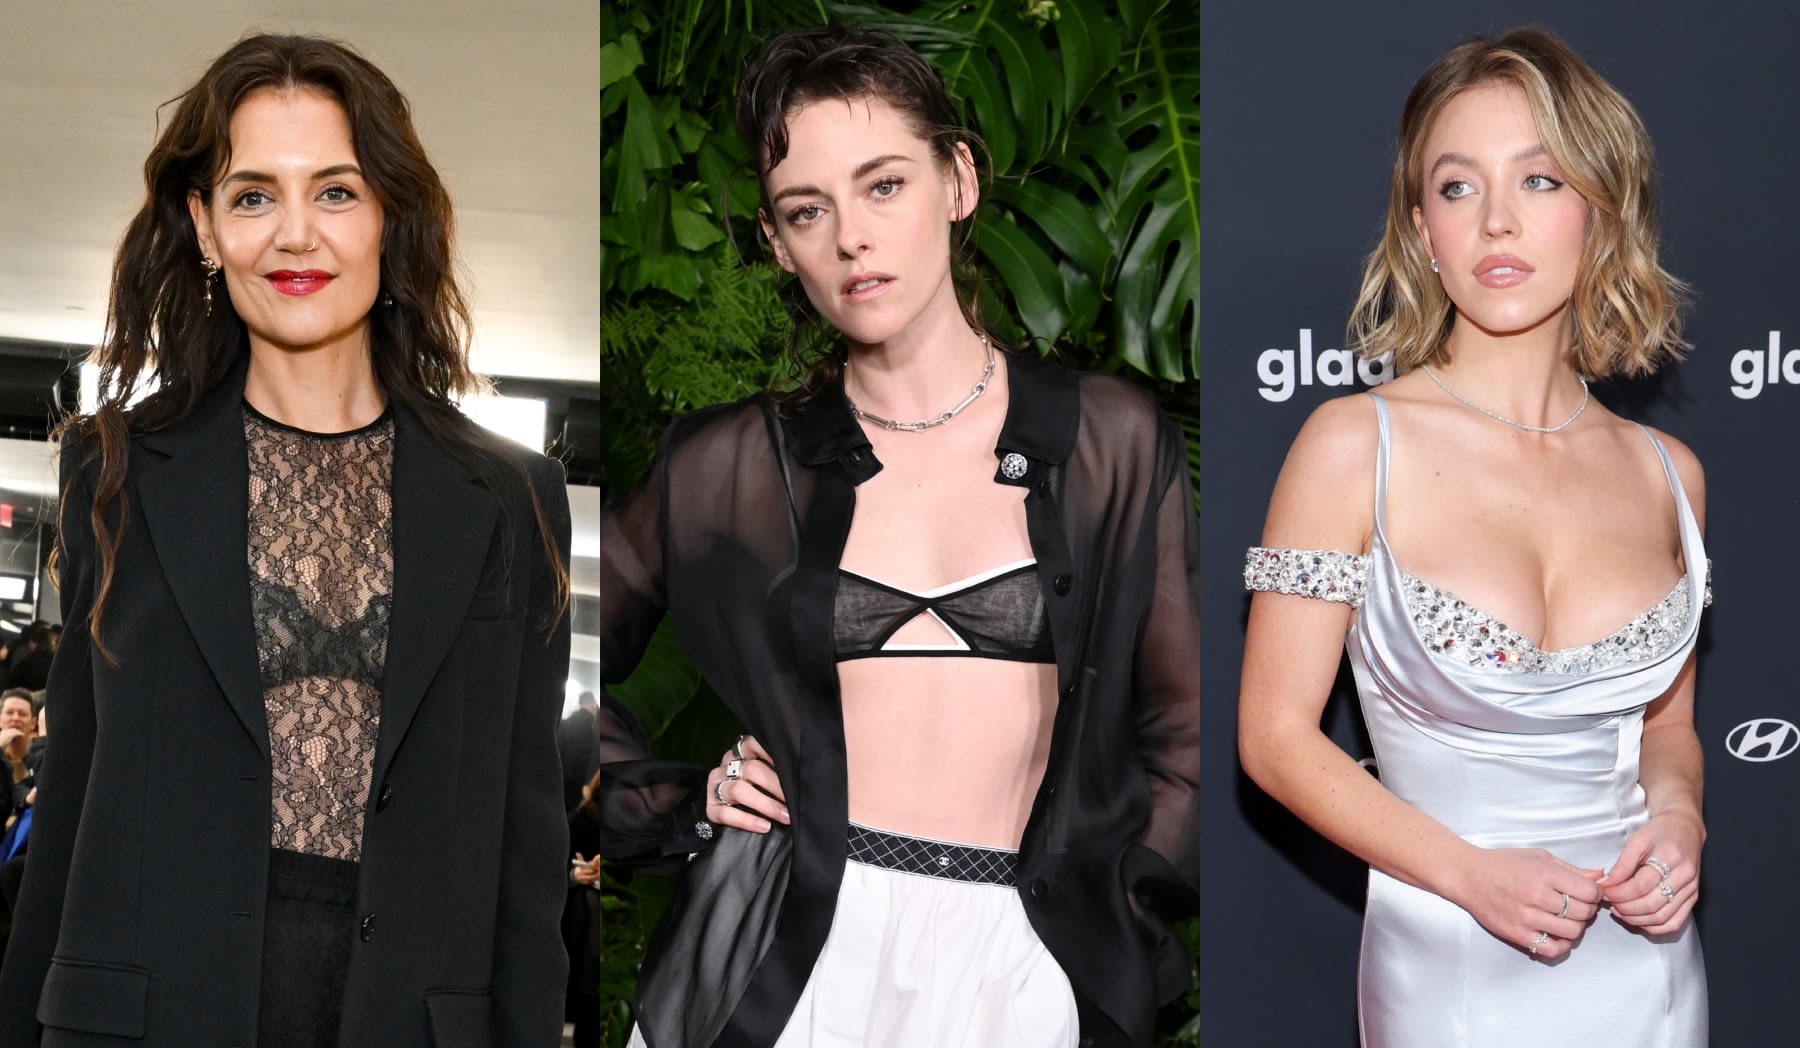 How Sydney Sweeney, Katie Holmes and More Stars Are Bringing Back the Bralette, Layering Trend